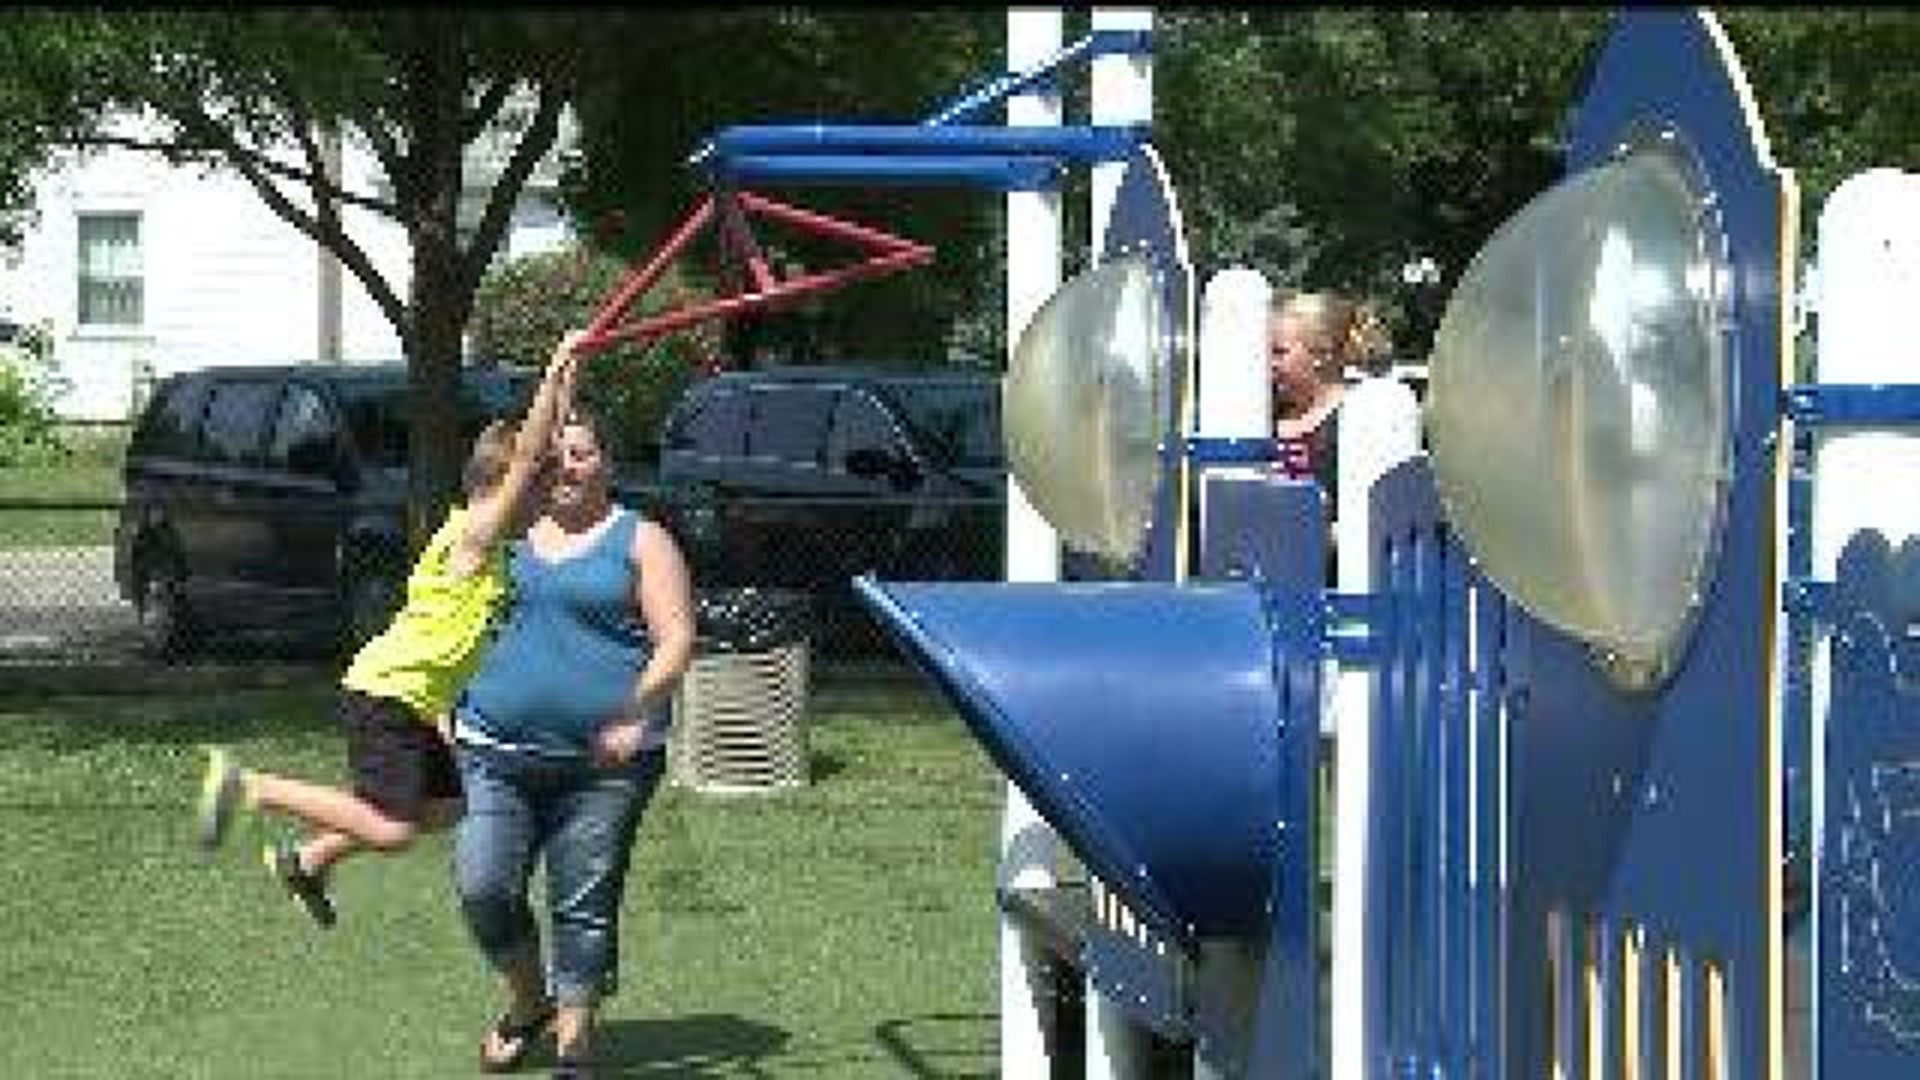 Let’s Move QC: Local Kids Experience Most Common Summertime Injuries